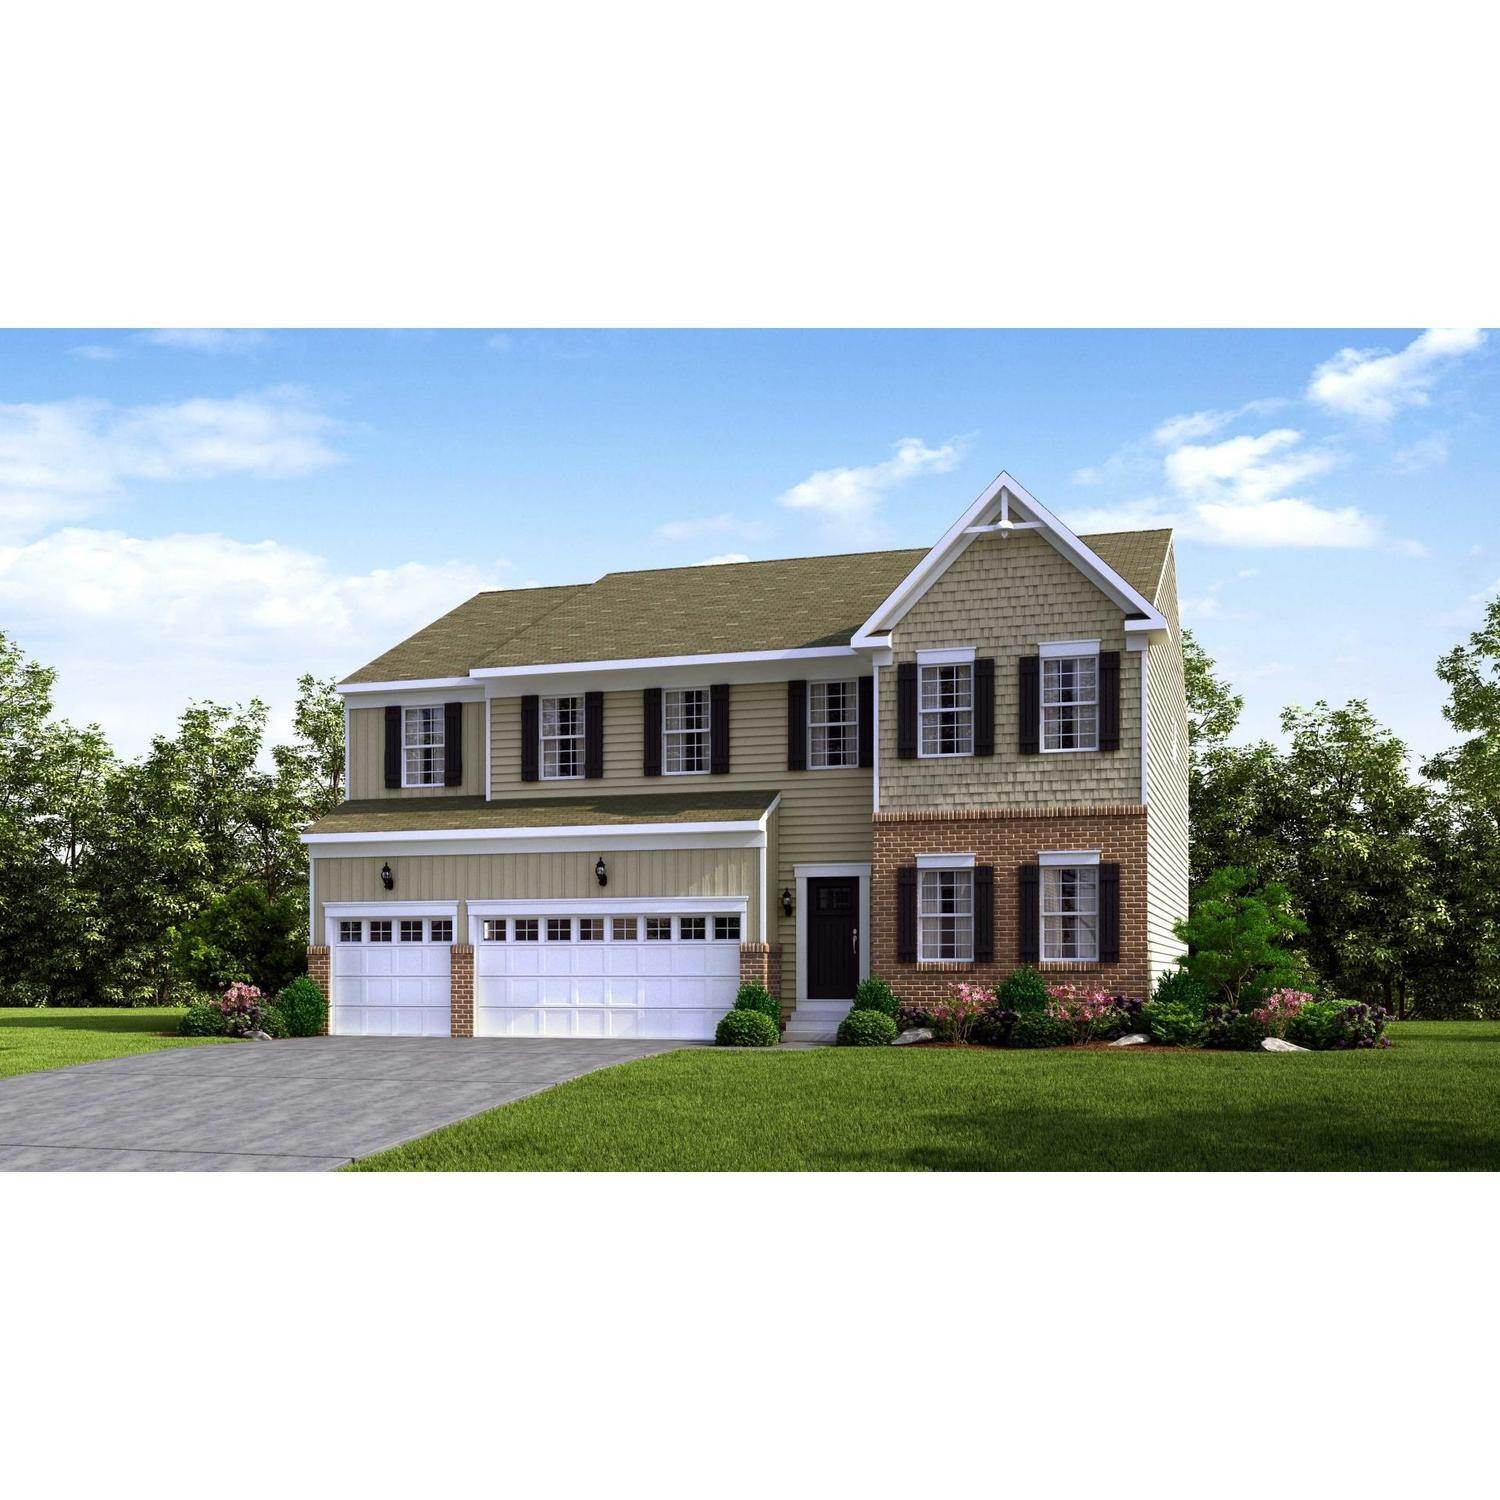 Single Family for Sale at Windmont Farms 2714 W Hardies Rd, Gibsonia, PA 15044